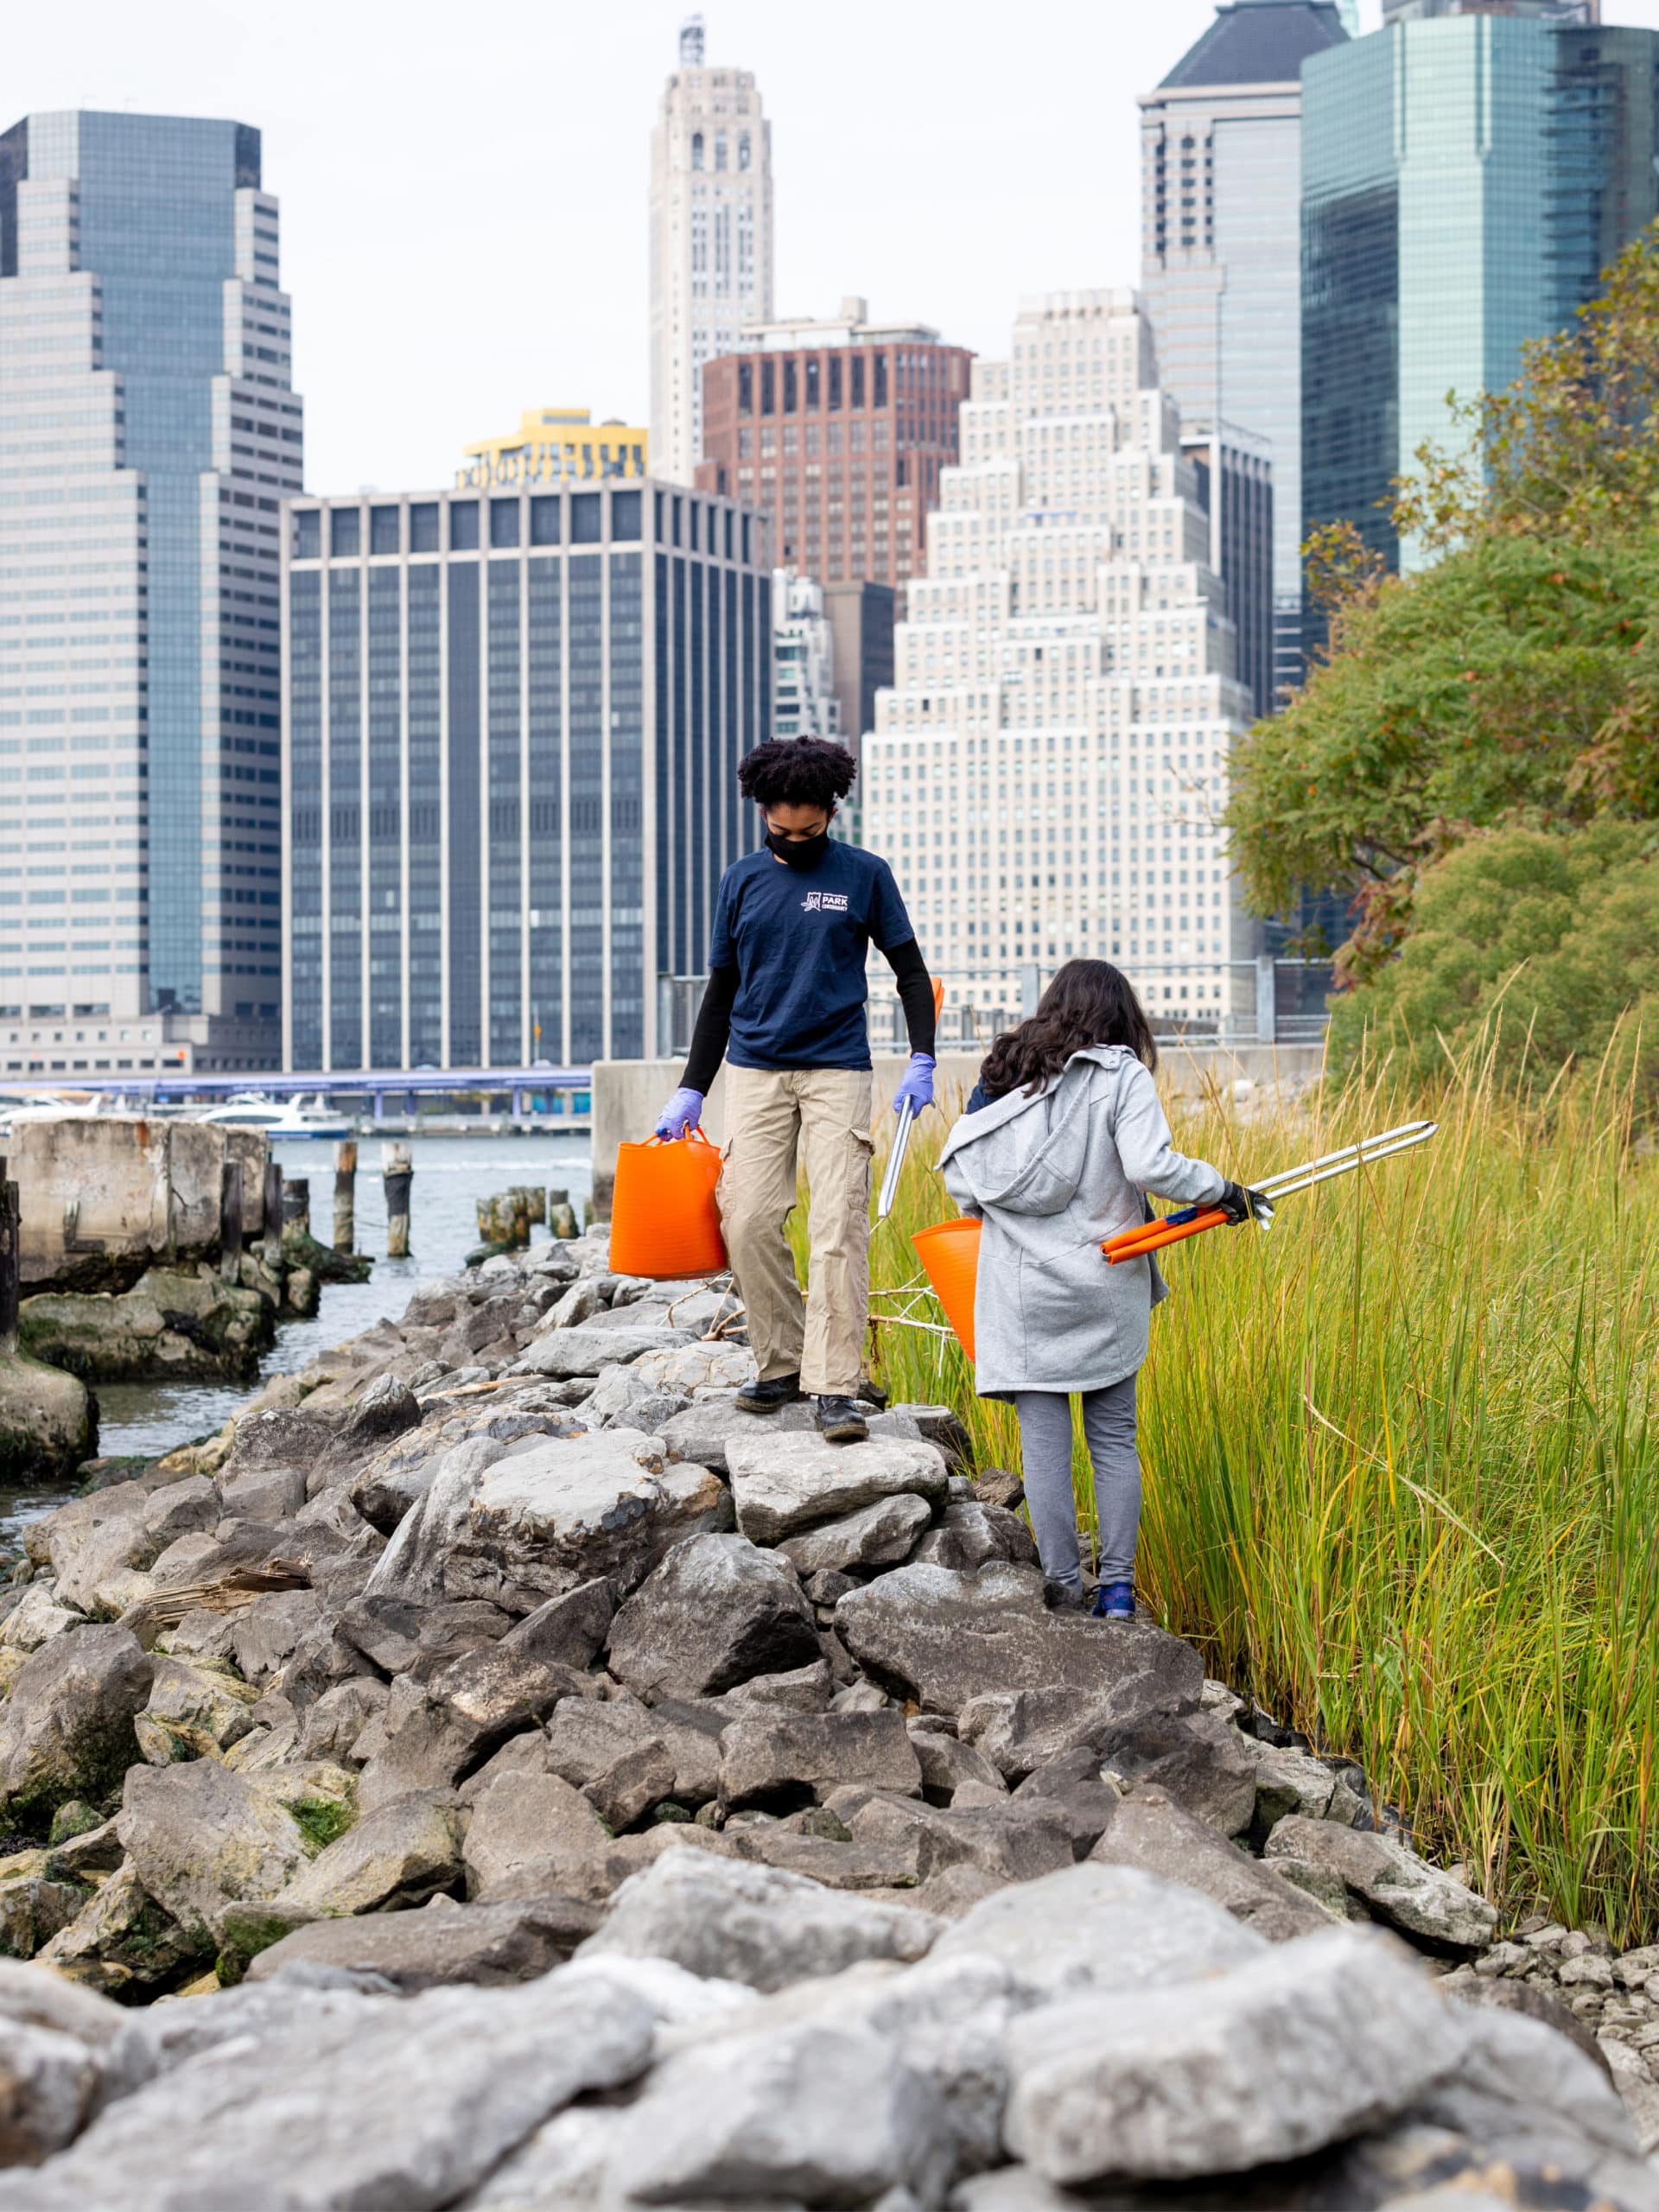 Teens cleaning up trash along the rocks by the Pier 1 Salt Marsh.